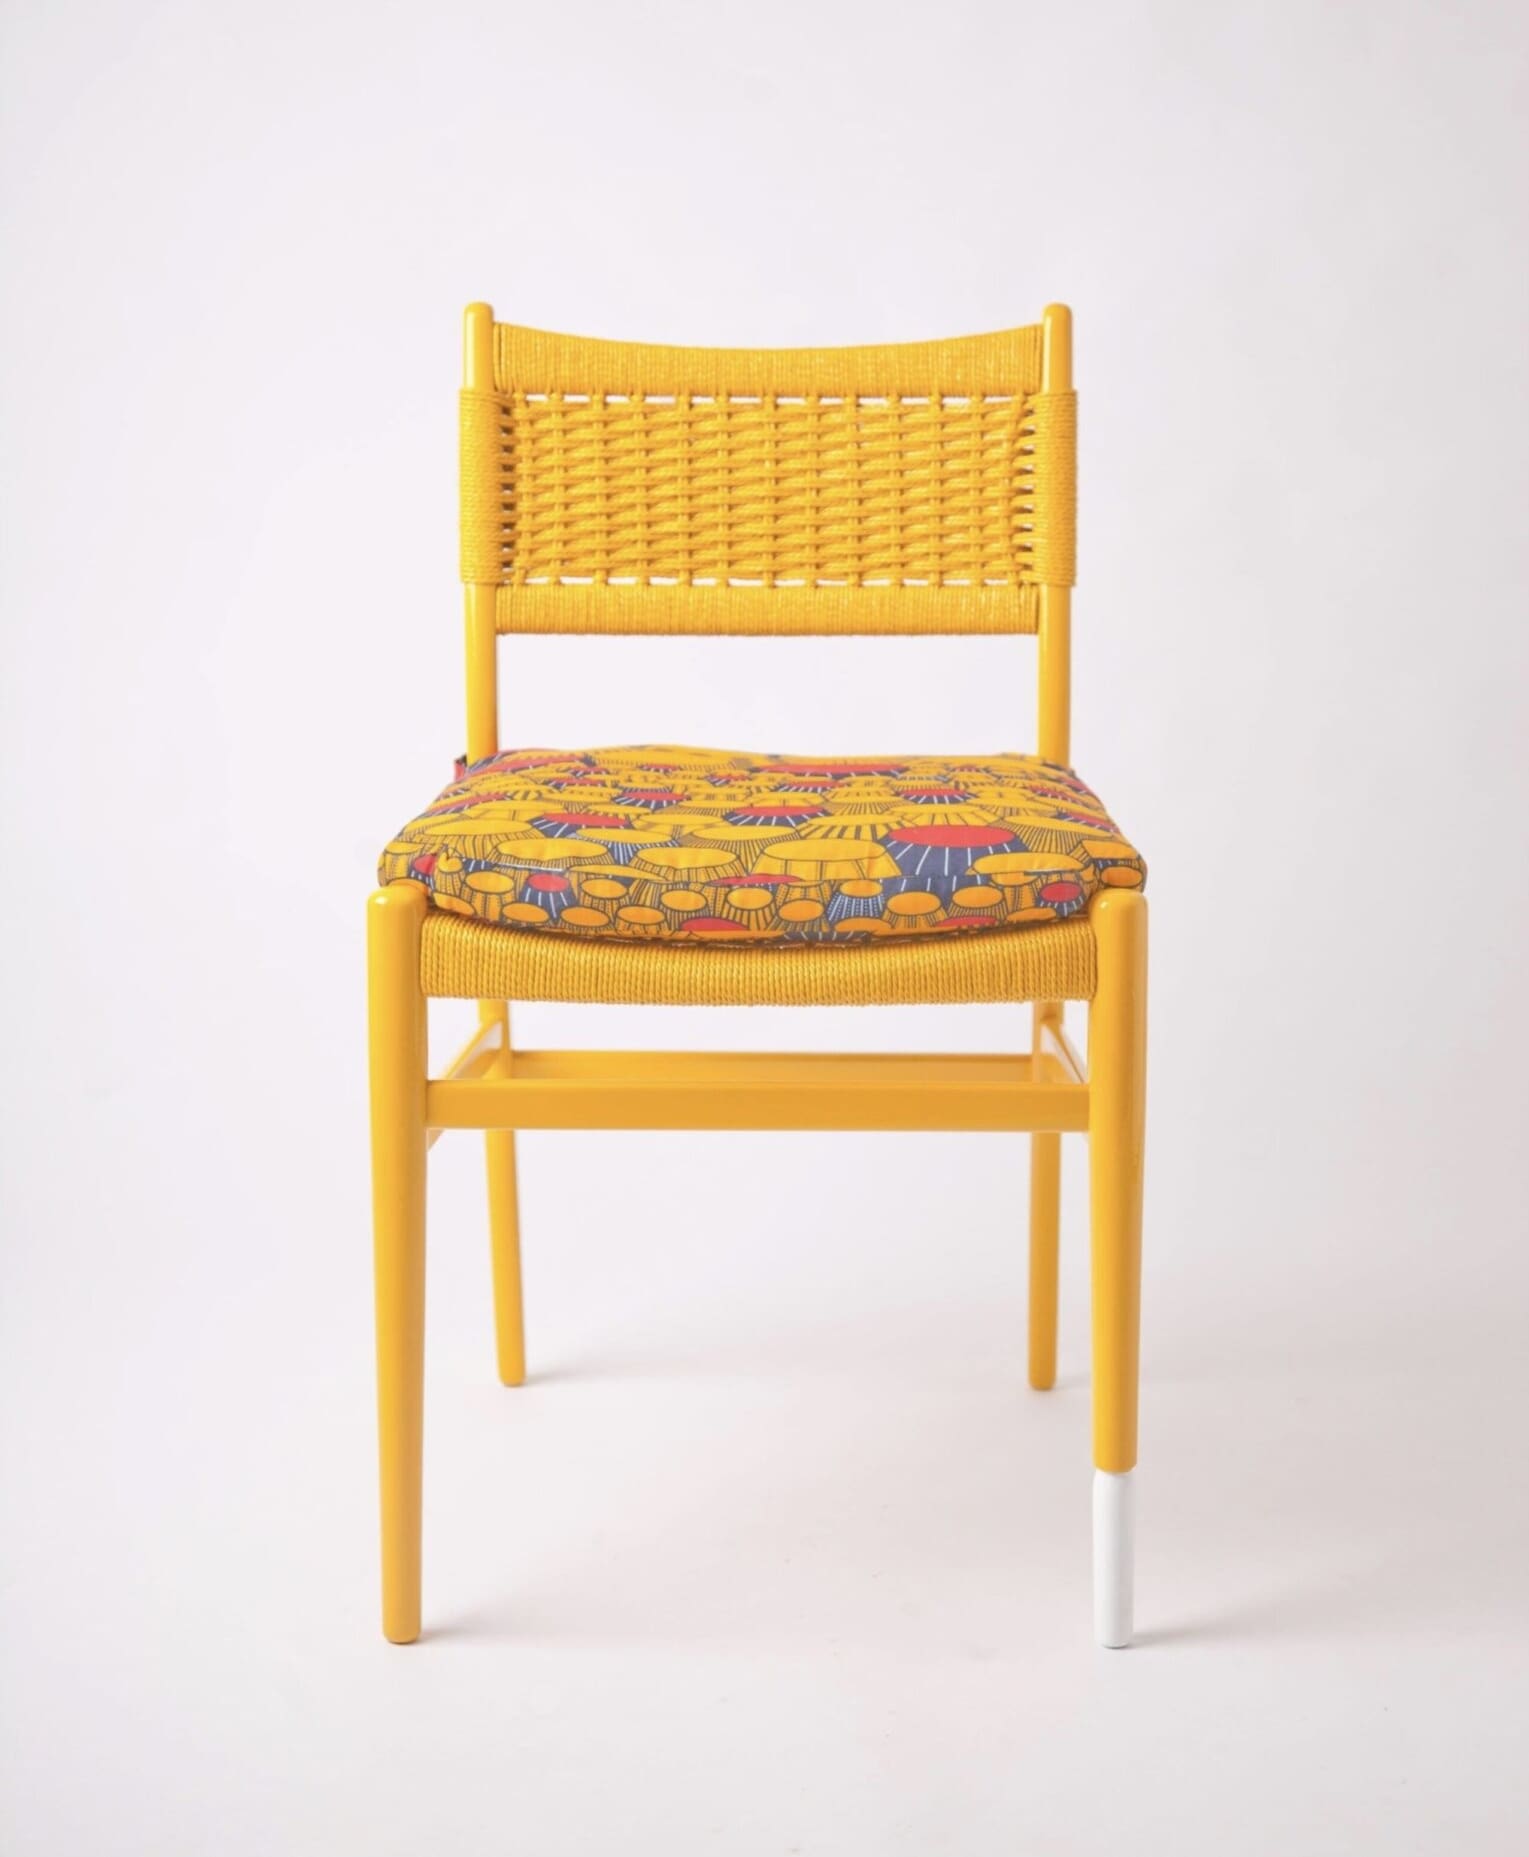 Yinka Ilori interview | This is Where It Started, part of Yinka Ilori's If Chairs Could Talk upcycled chair collection